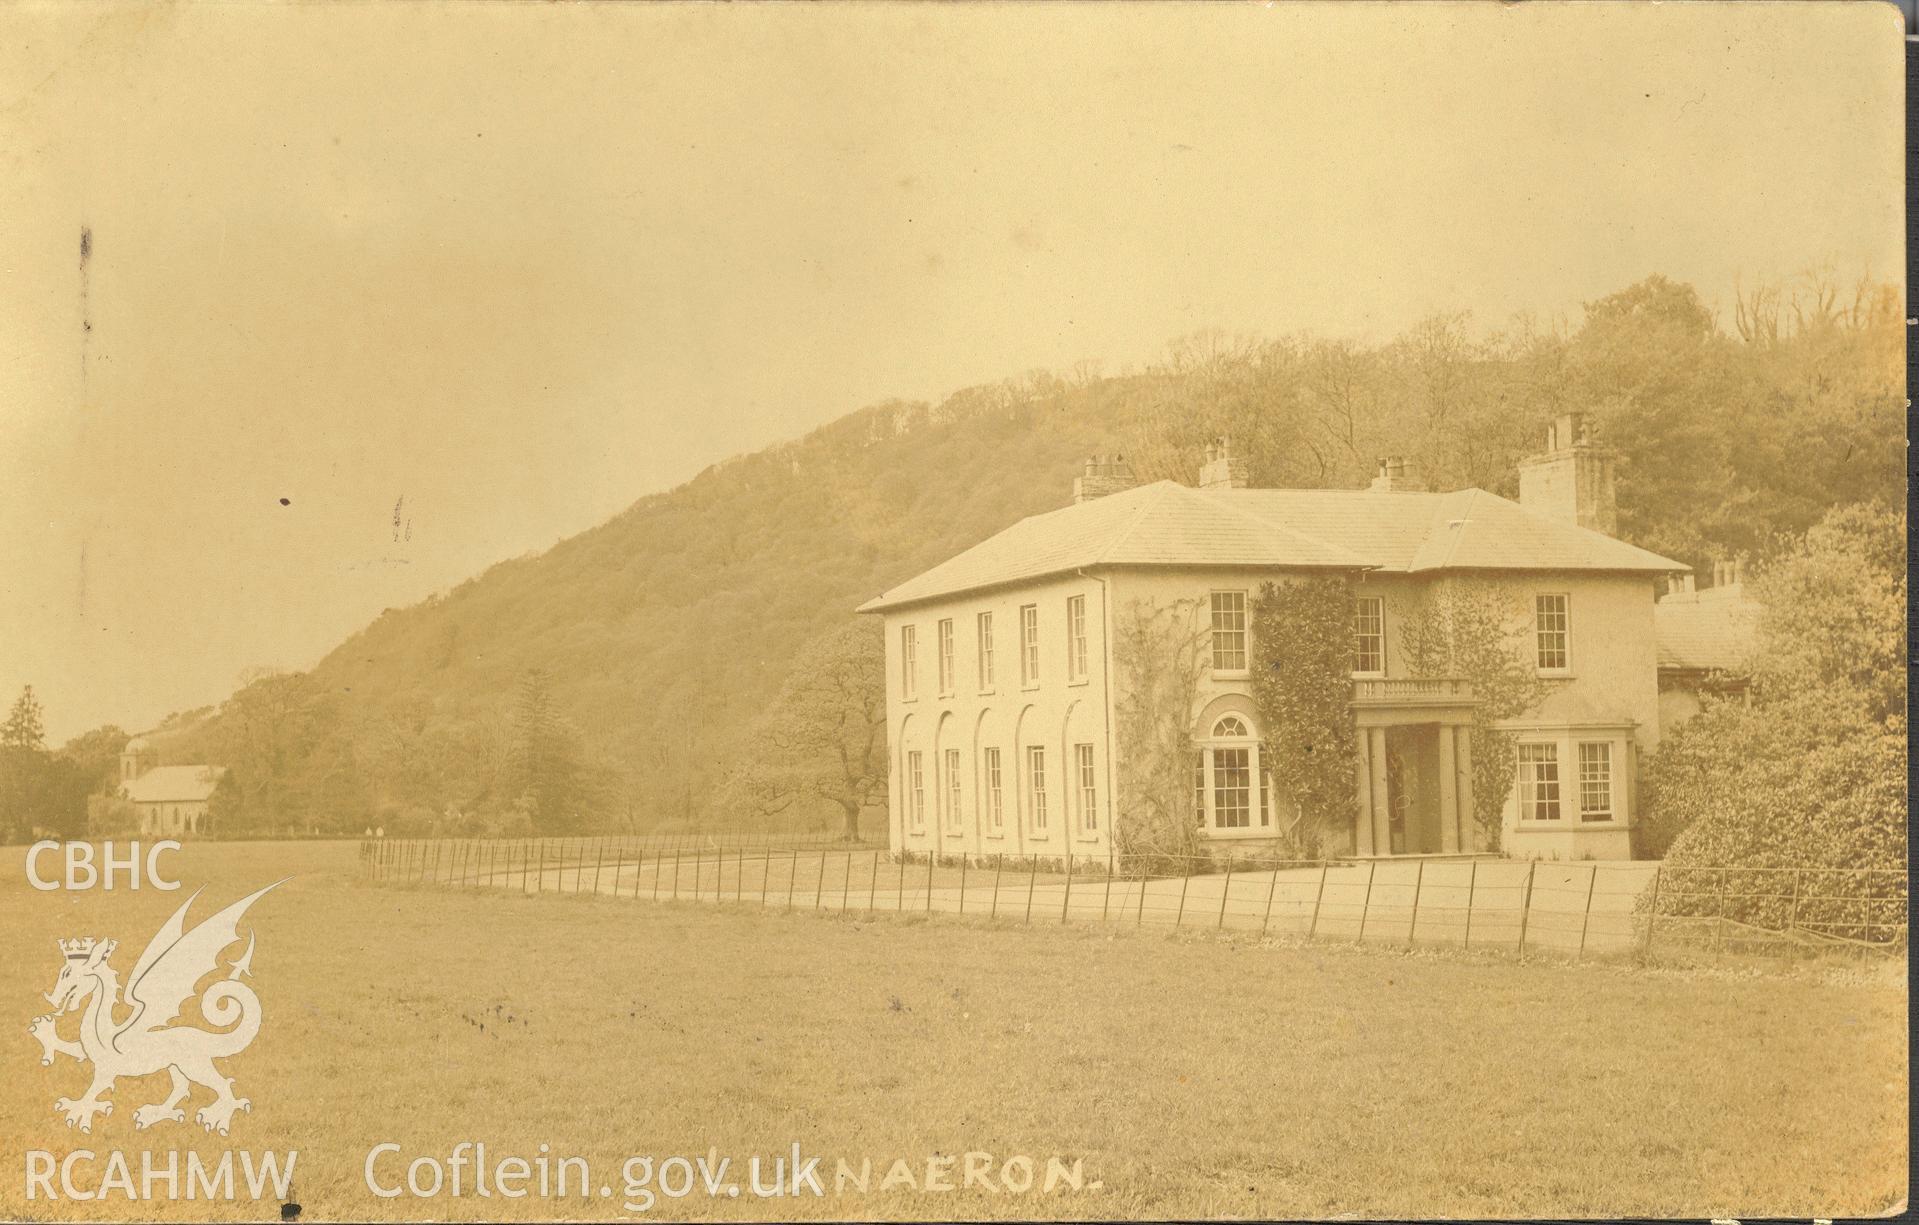 Digitised postcard image of Llanerchaeron House. Produced by Parks and Gardens Data Services, from an original item in the Peter Davis Collection at Parks and Gardens UK. We hold only web-resolution images of this collection, suitable for viewing on screen and for research purposes only. We do not hold the original images, or publication quality scans.